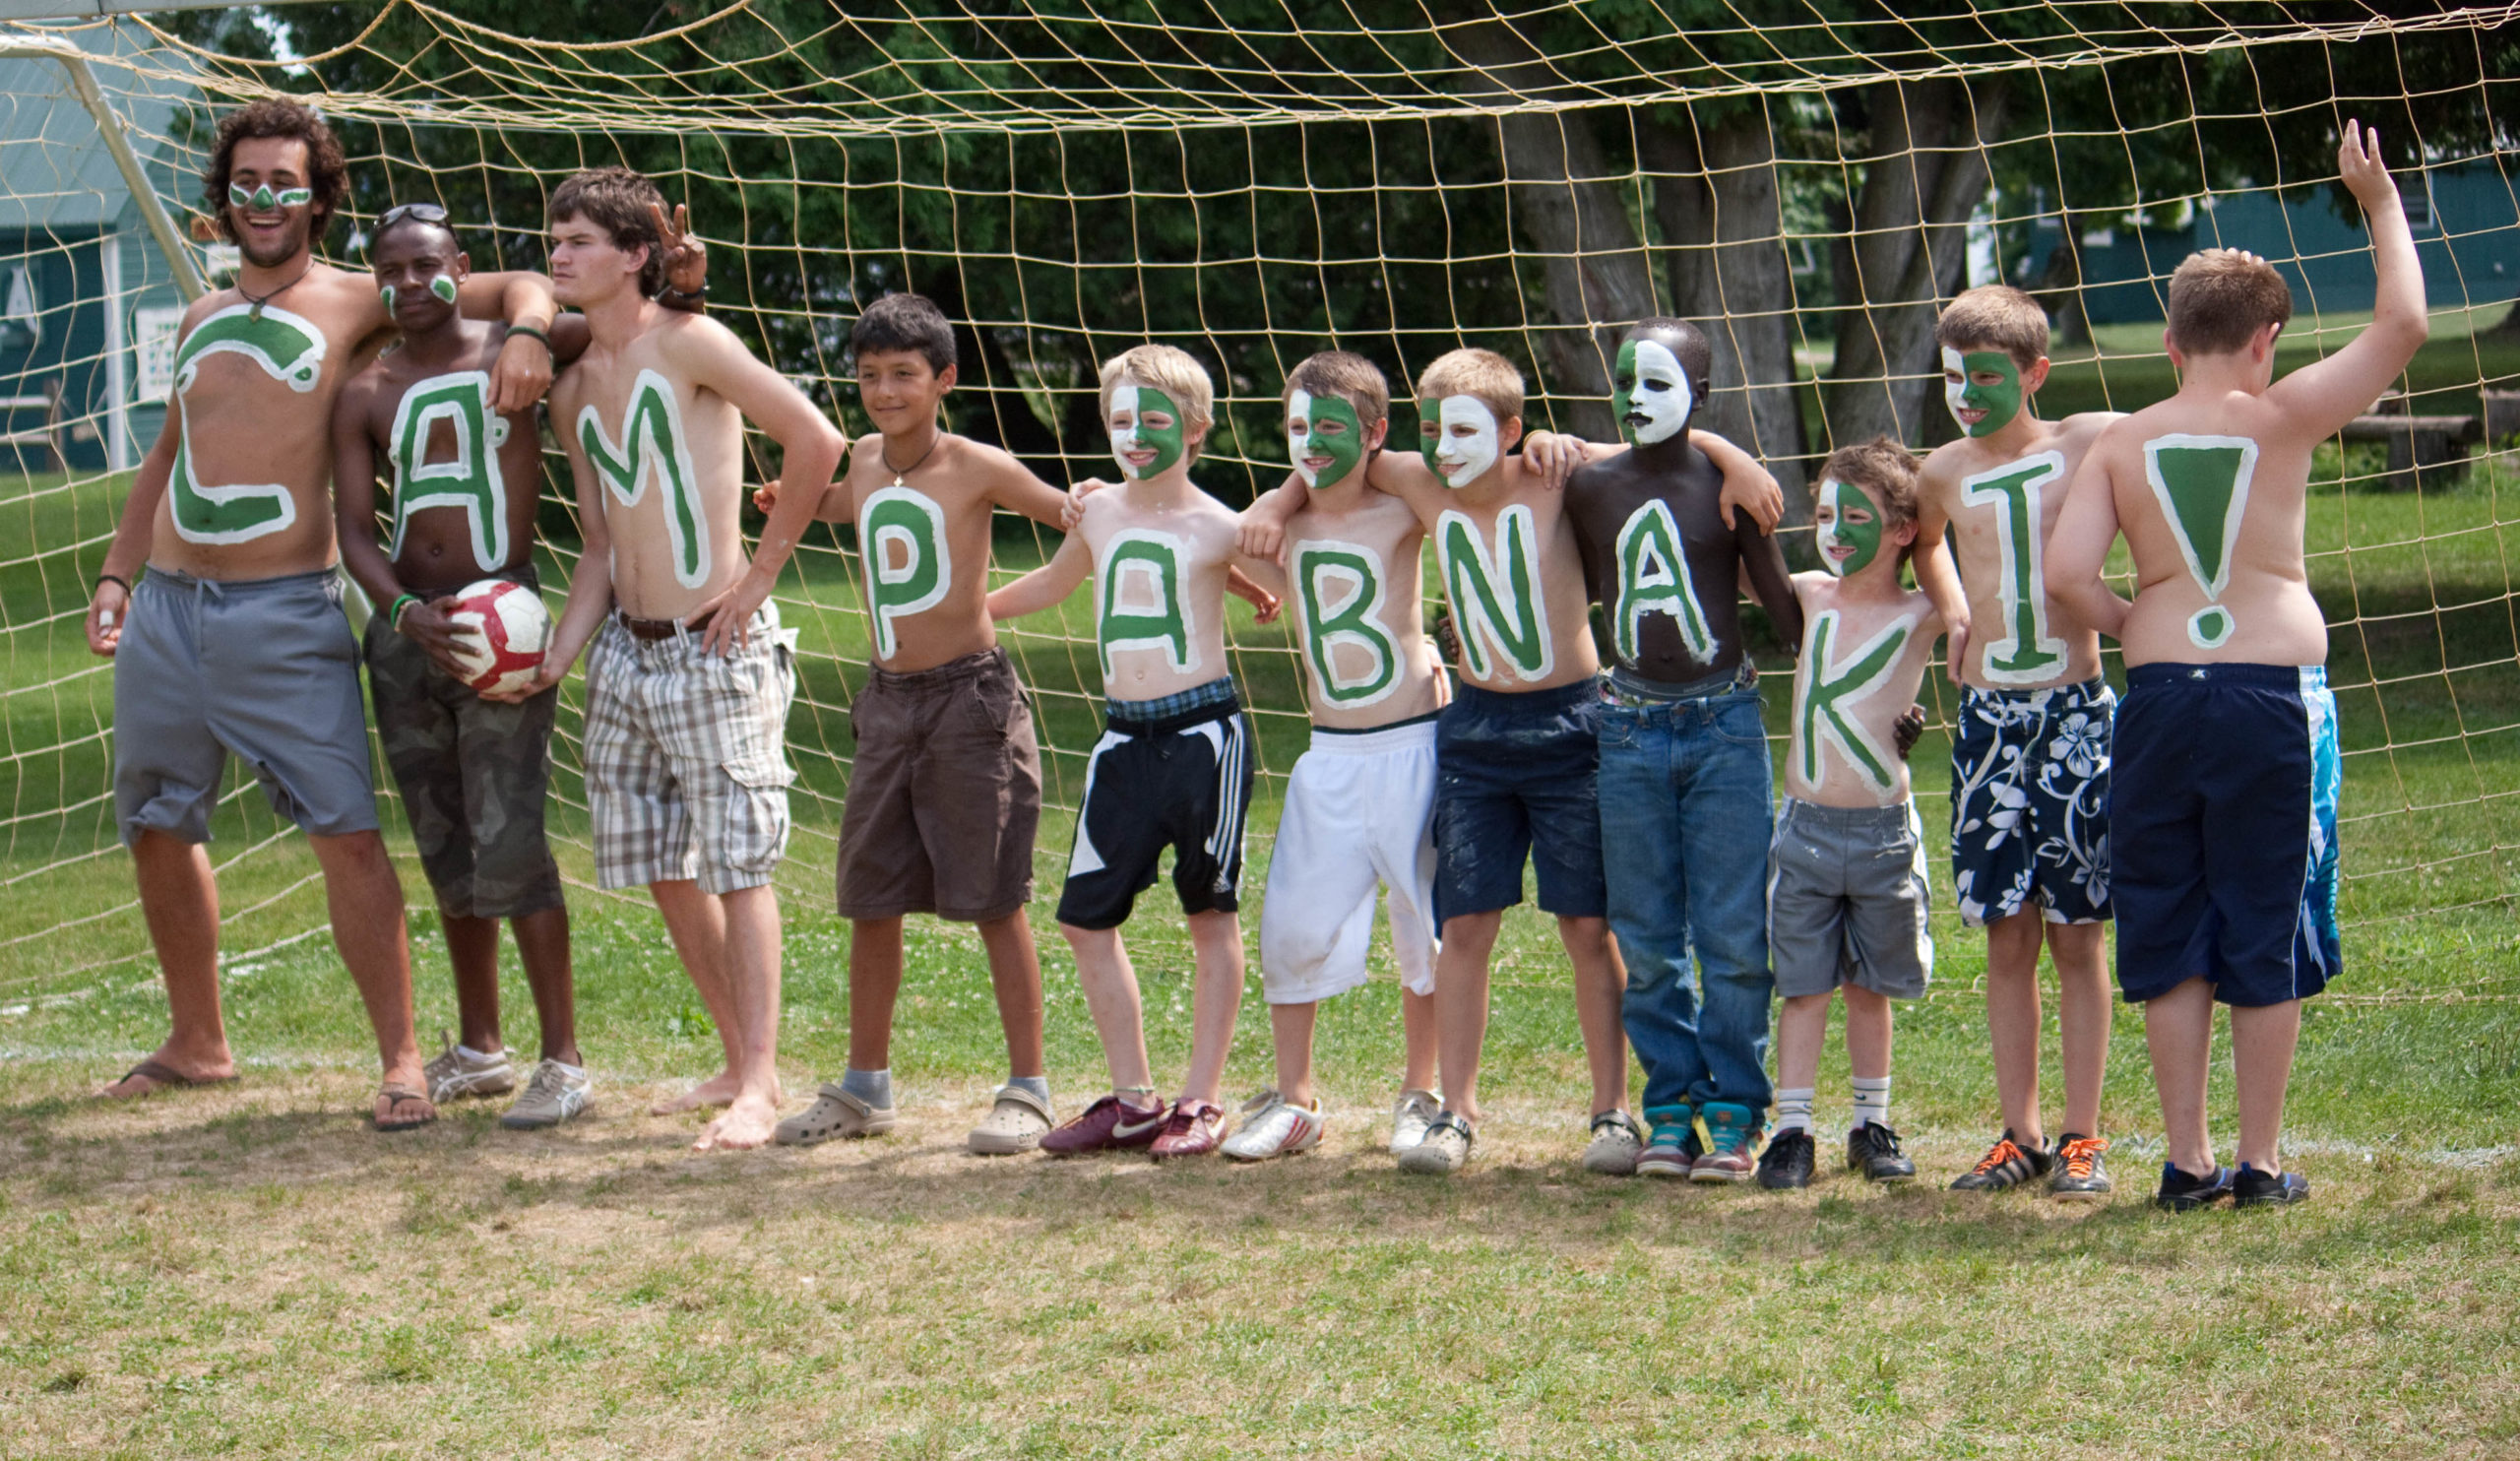 Campers with letters spelling Camp Abnaki painted on their chests in front of a soccer goal